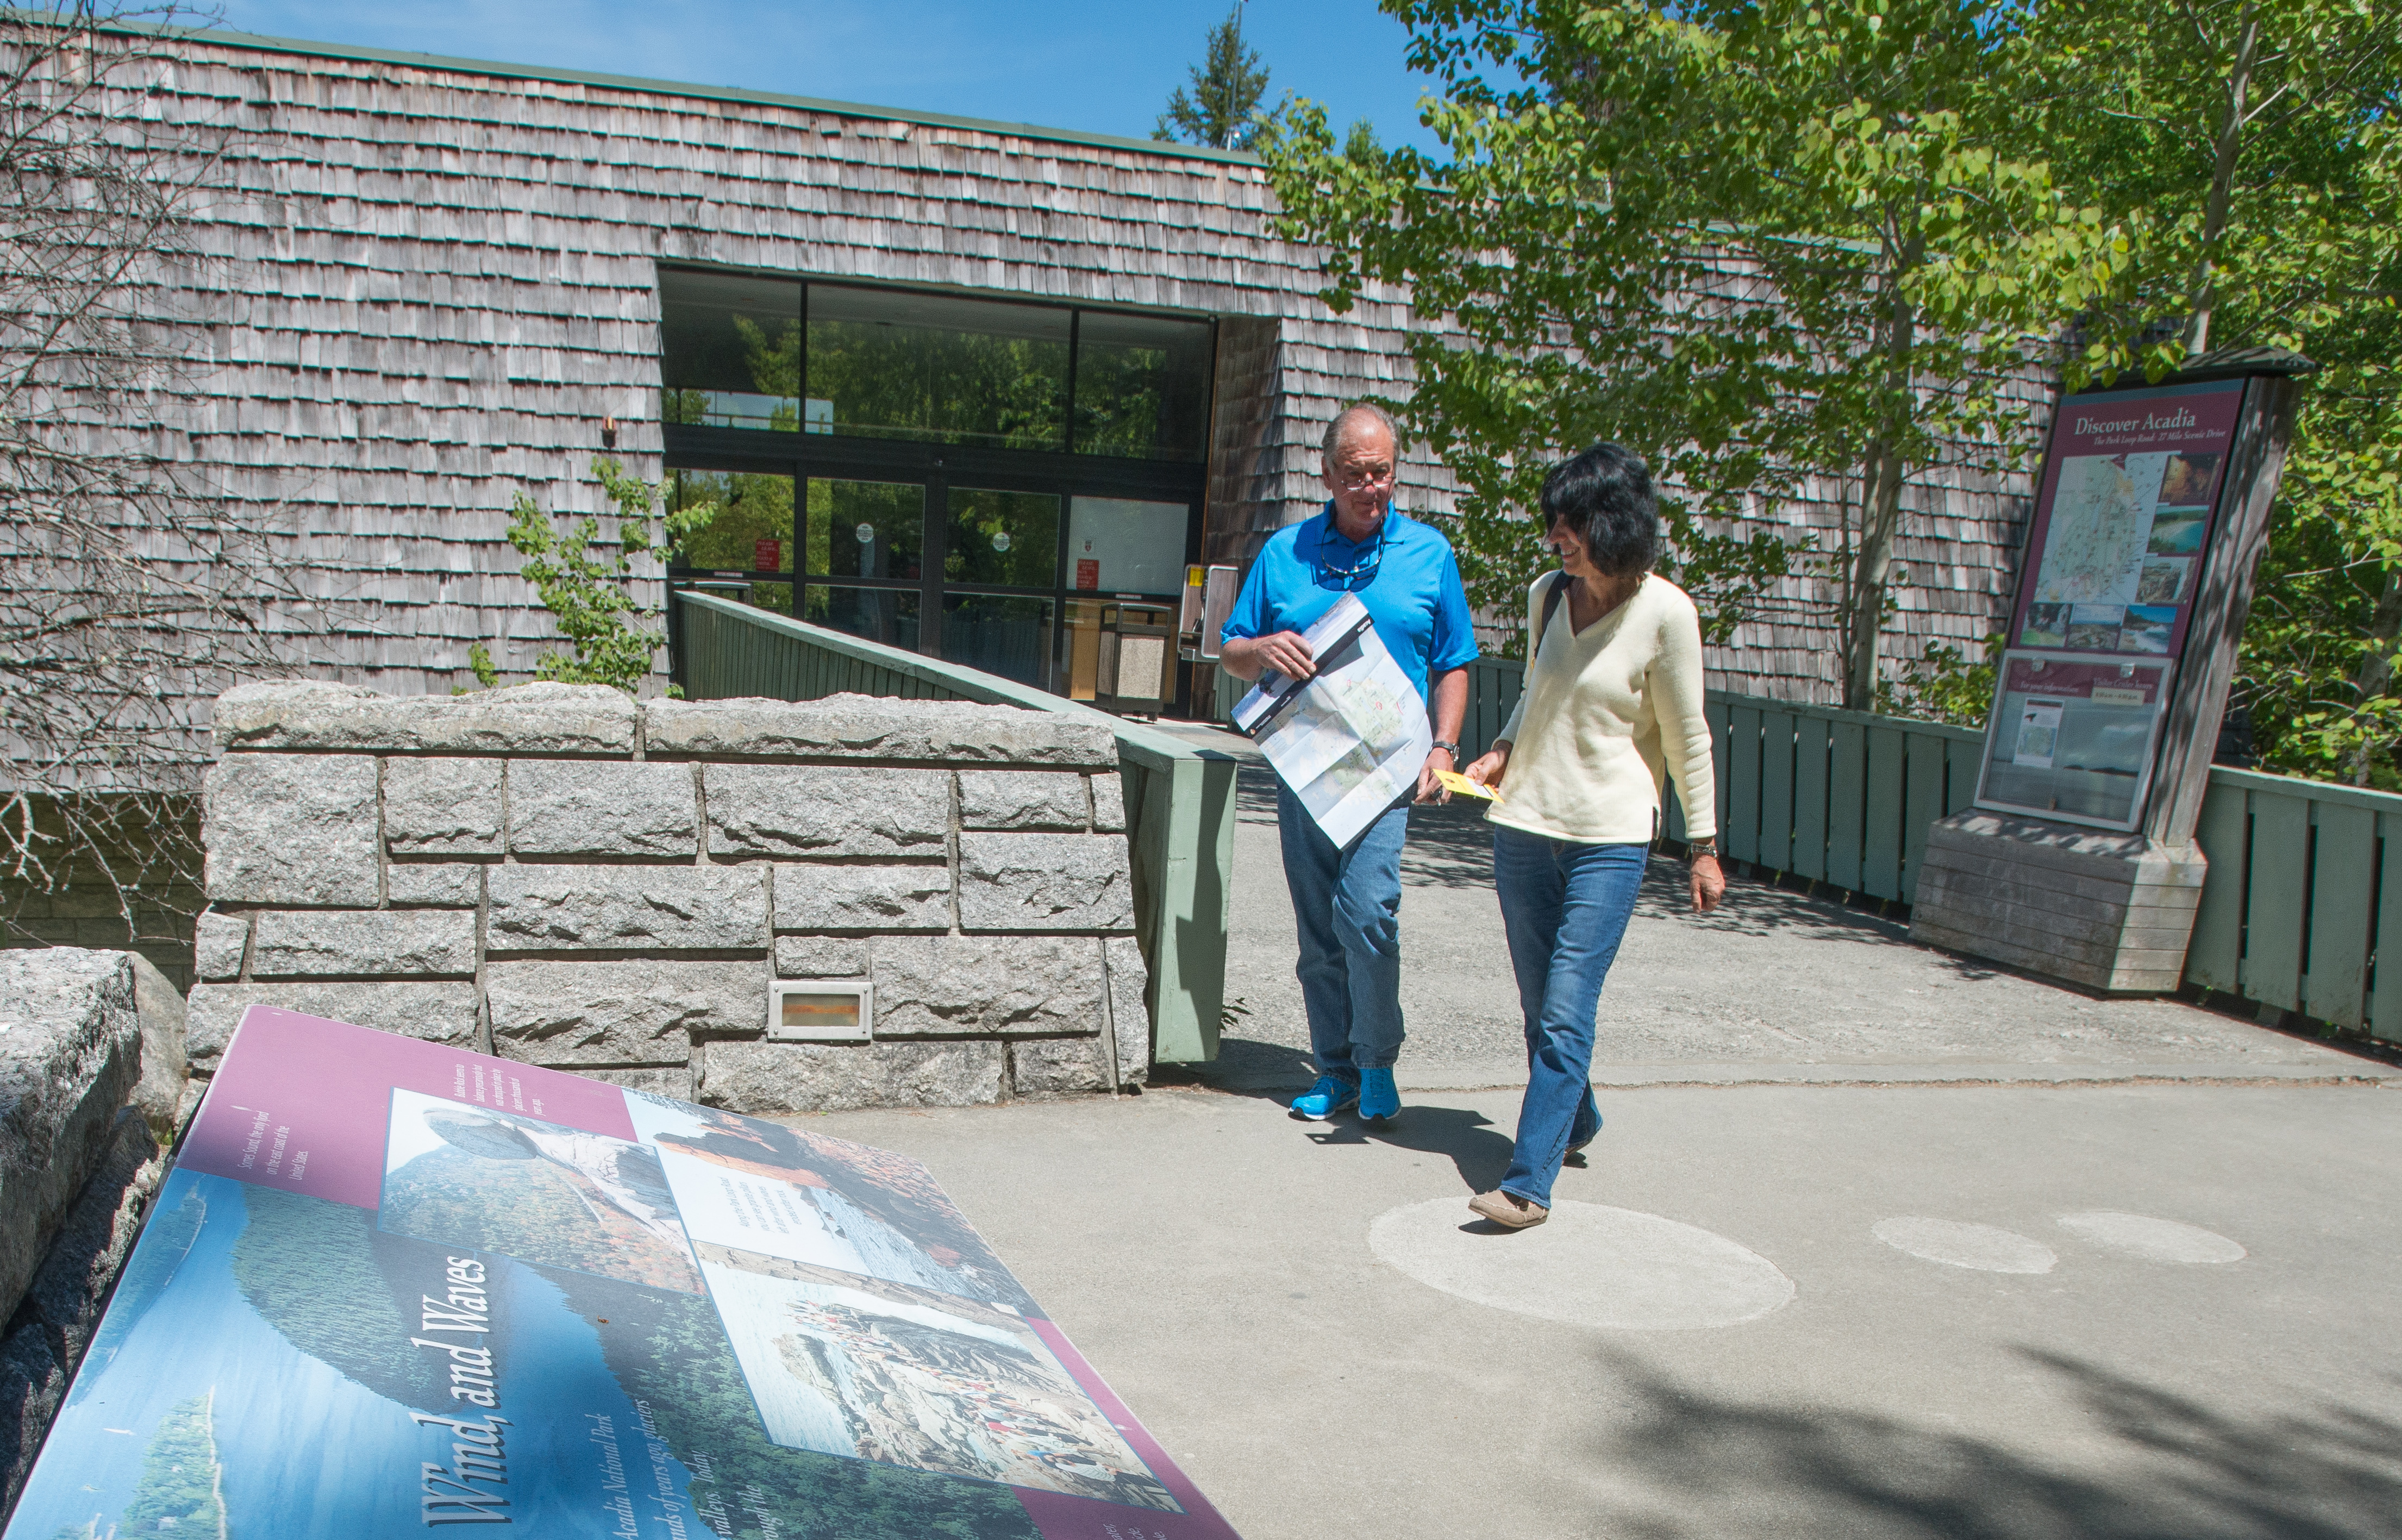 A man and woman walk outside a visitor center entrance